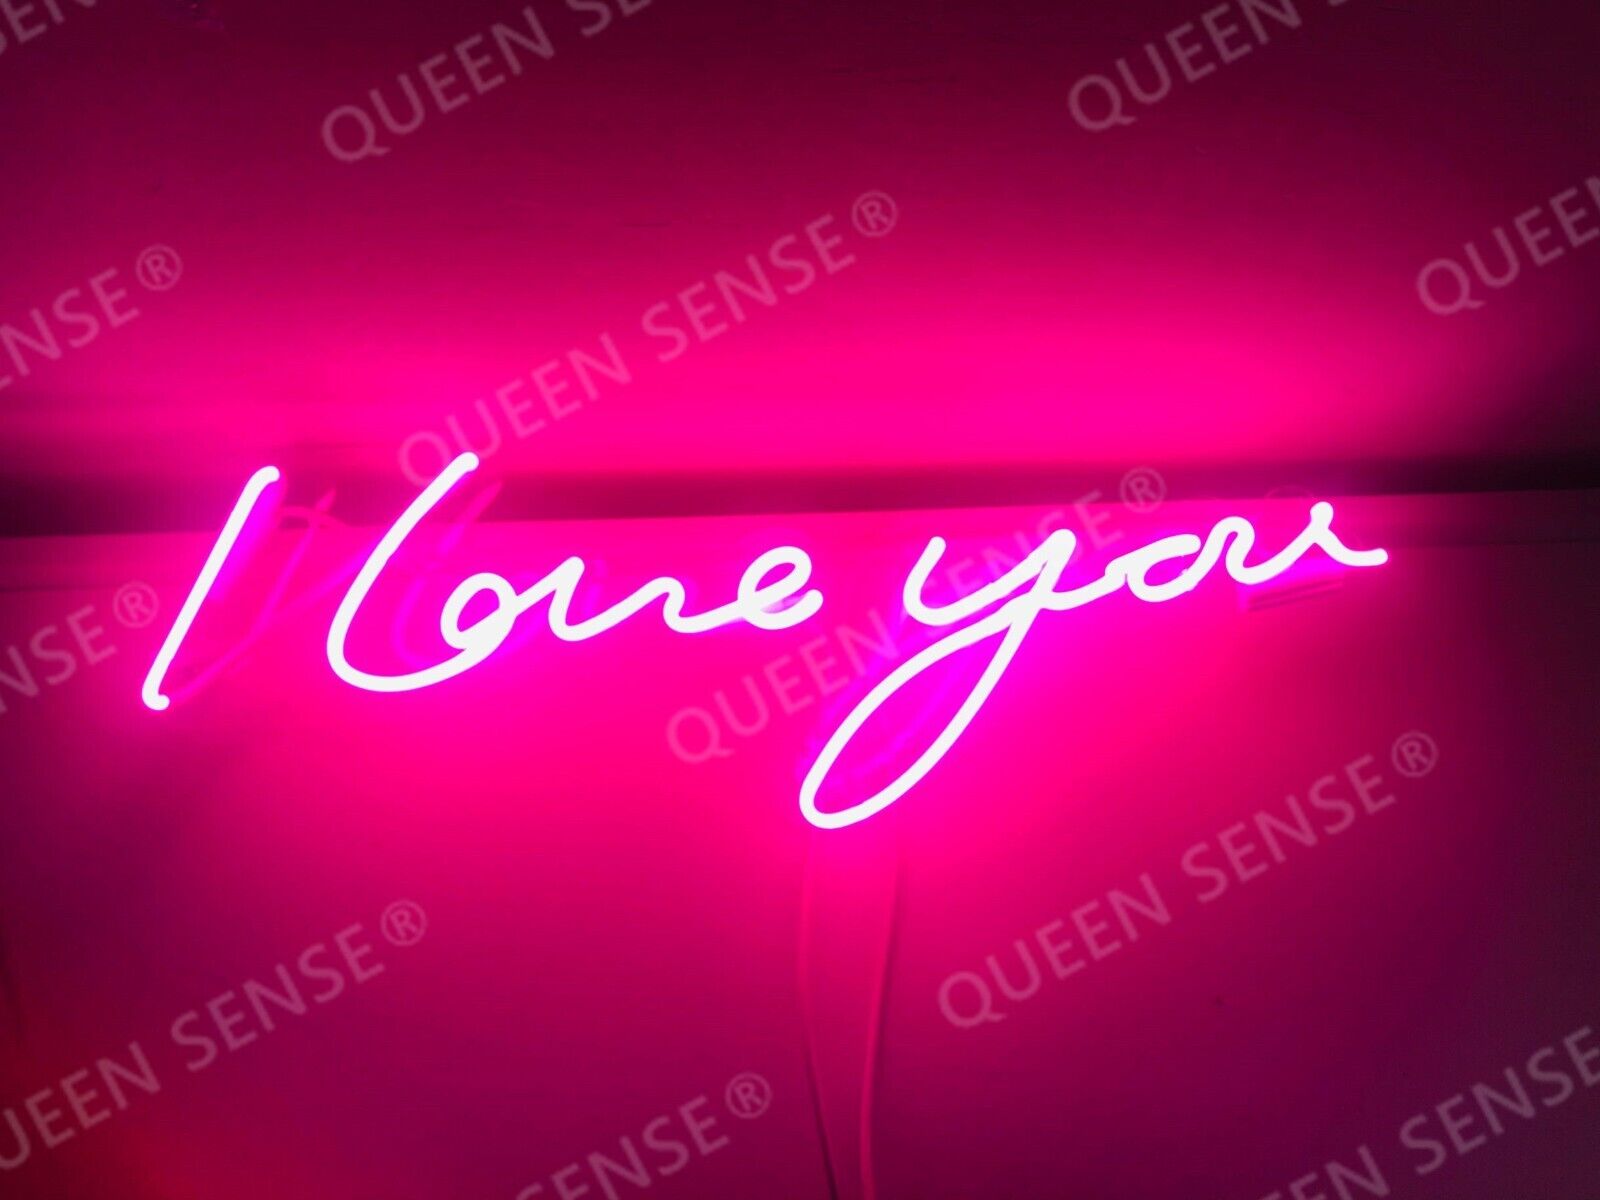 I Love You Pink Neon Sign Lamp Light 24